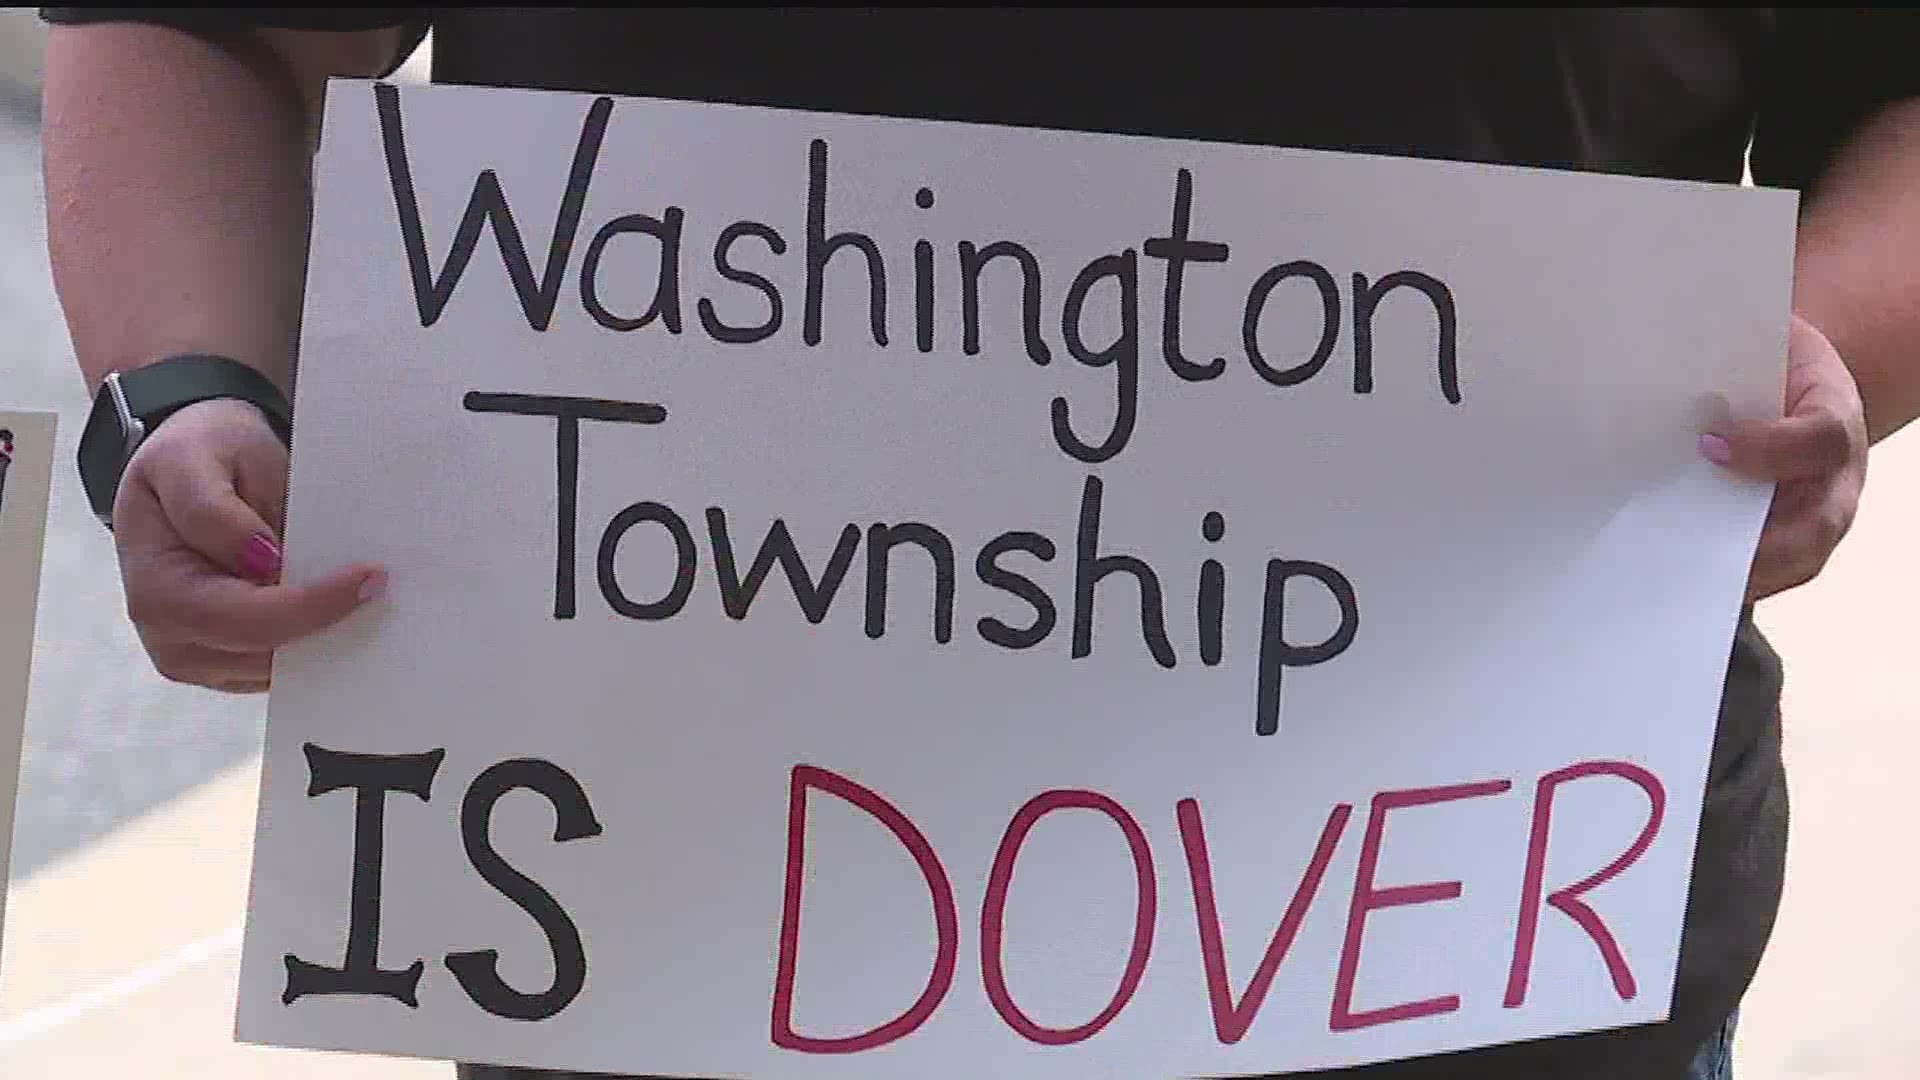 A judge ruled Washington Township could secede from the Dover Area School District, but the board isn't giving up those students without a fight.